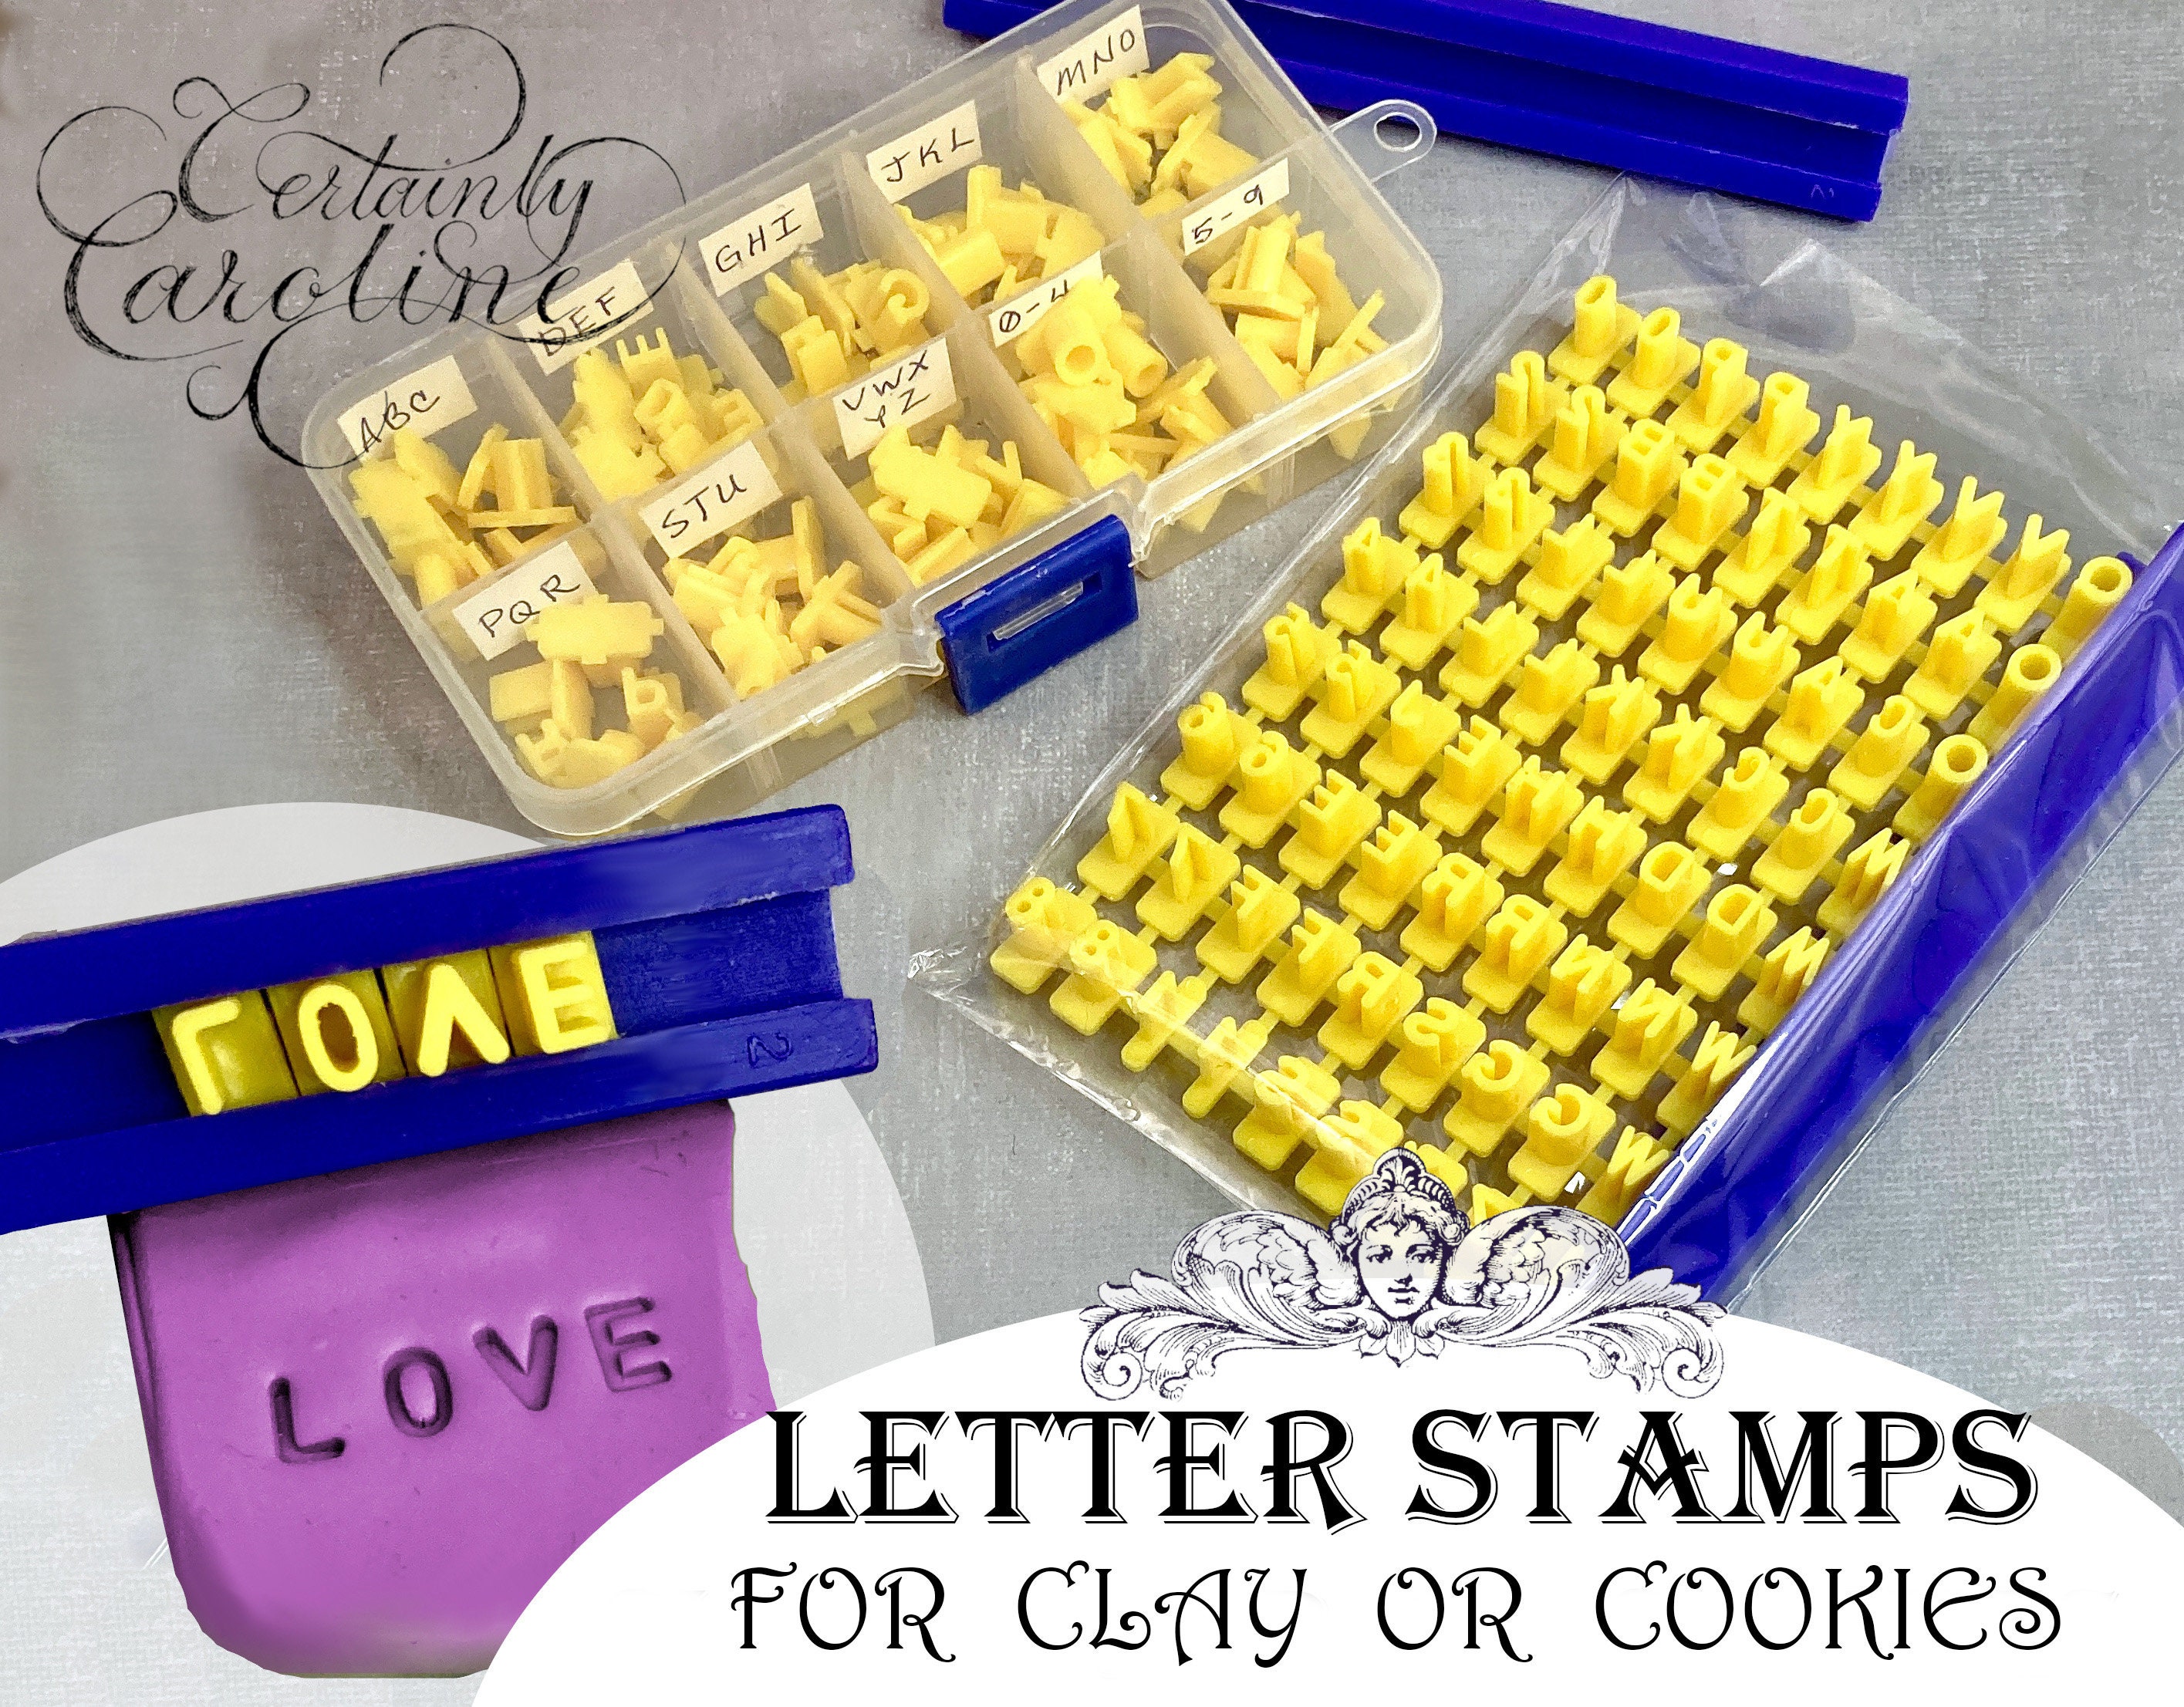 Sculpd Letter Stamps for Air Dry Clay, Personalise Your Pottery Creations,  6mm Tall Letters for Clay Made from Eco-Friendly Material, Available in